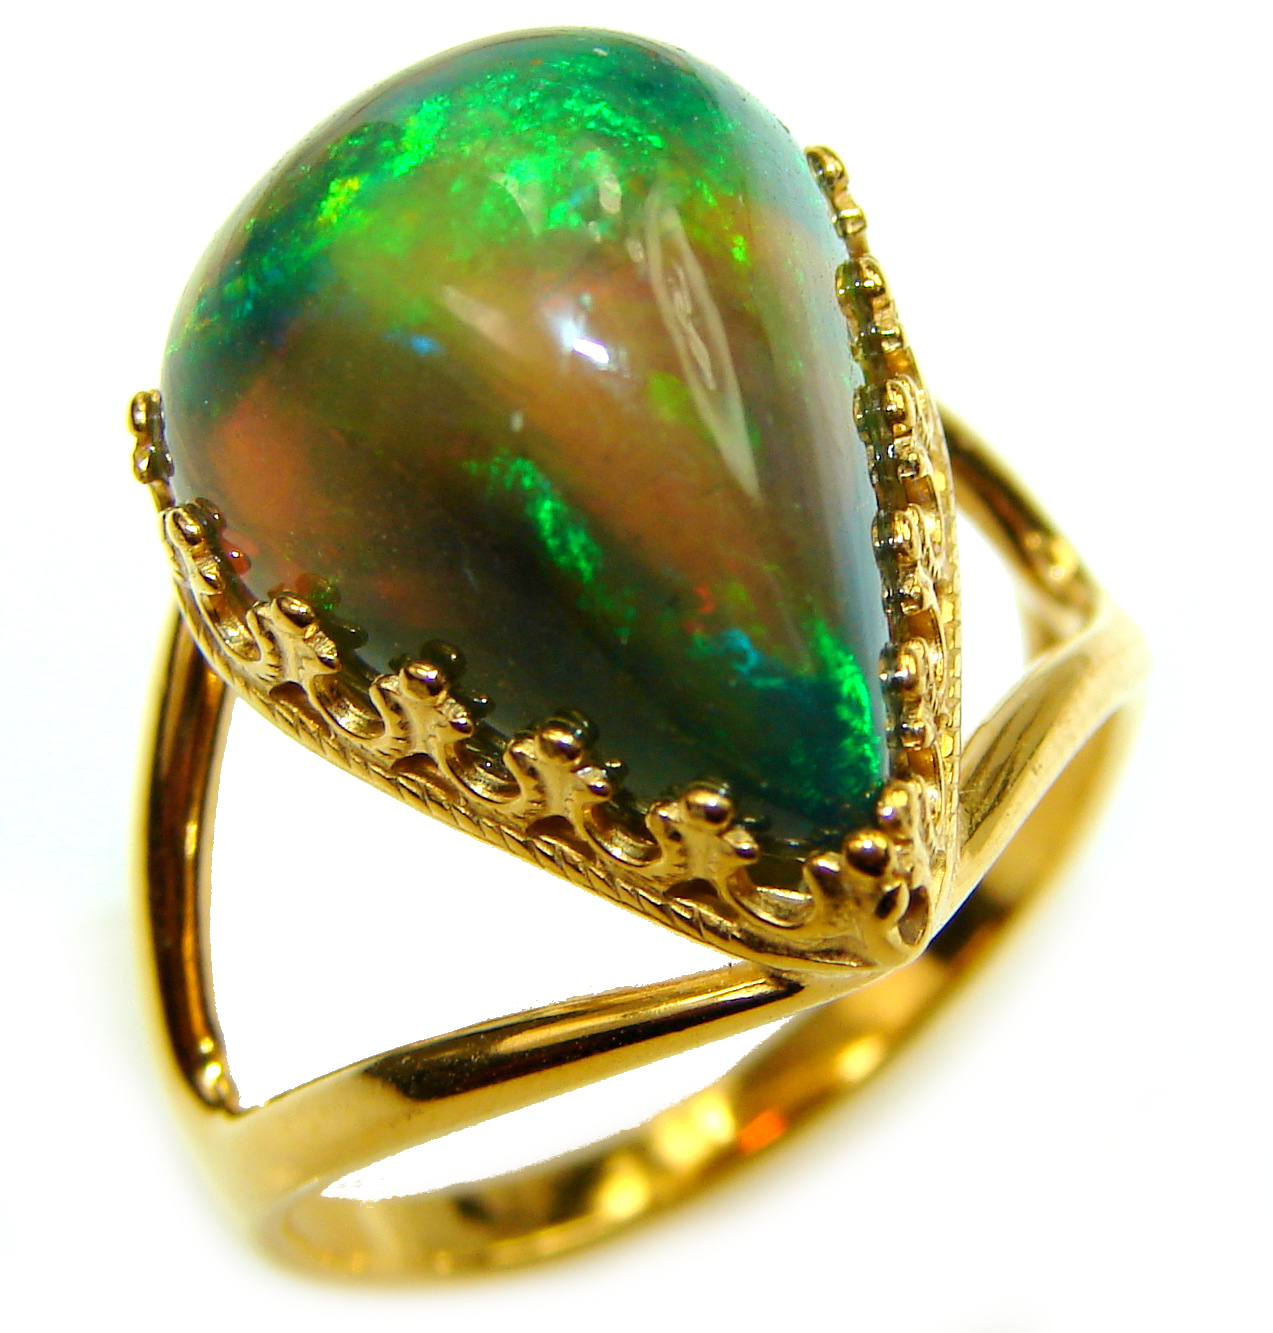 A Milky Way  Genuine  14.9 carat Black  Opal  18K  Gold over .925 Sterling Silver handmade Ring size 7 1/2